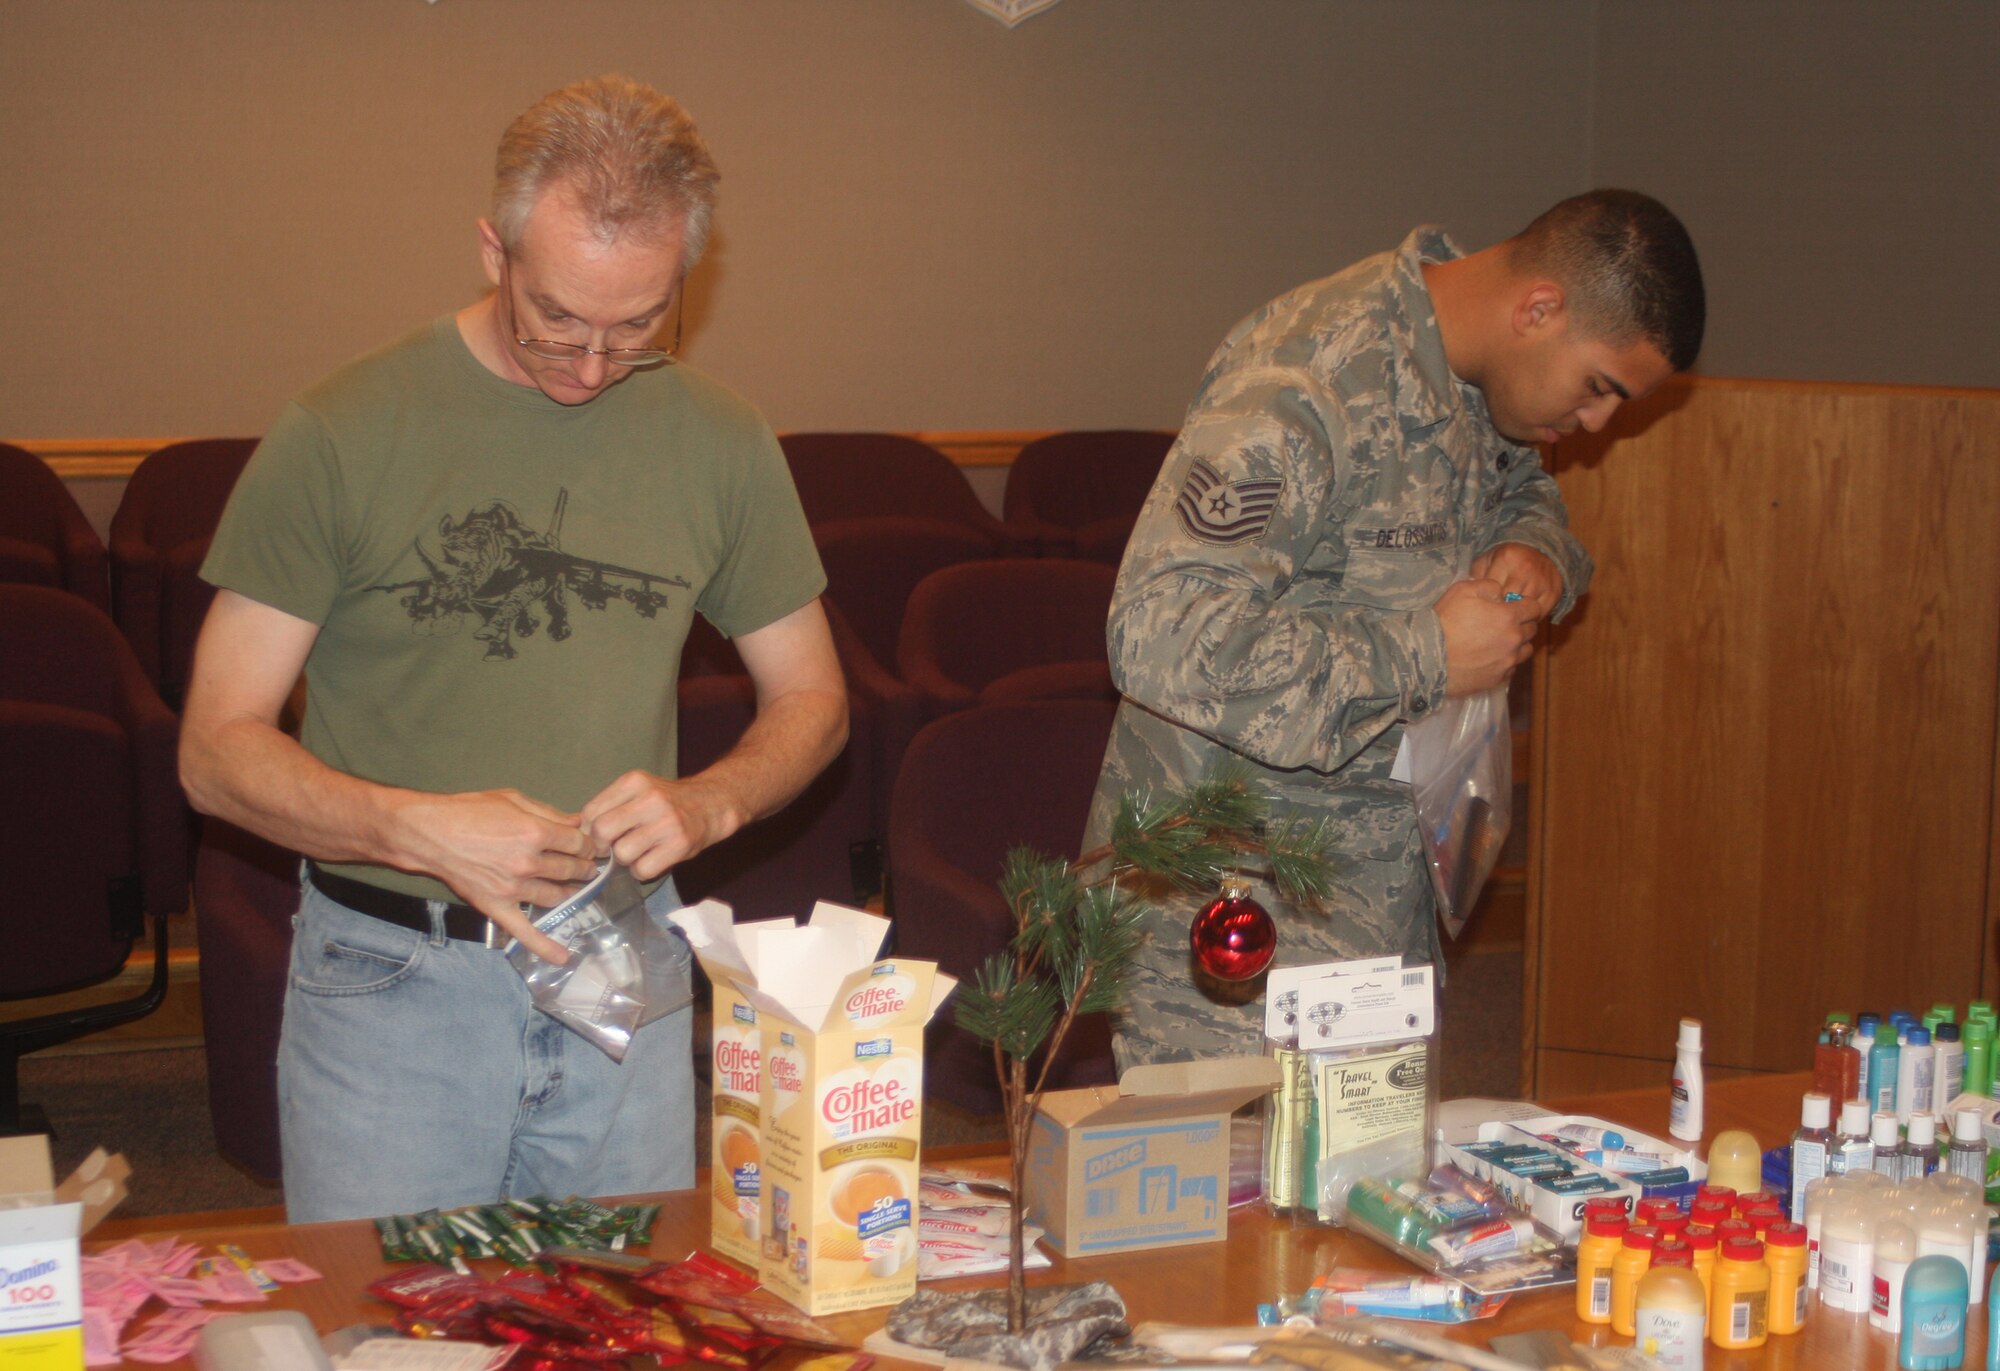 WRIGHT-PATTERSON AIR FORCE BASE, Ohio –Master Sgt. John Guillaum, 445th Maintenance Group, quality assurance, and Tech. Sgt. Ivan Delossantos, 445th Maintenance Operations Flight, fill bags with items that will be given to residents of the Veterans Affairs Medical Center, Dayton, Ohio, Dec. 5.  Volunteers from the 445th Maintenance Group spent the afternoon filling more than 100 bags with items, such as soap, shampoo, lip balm and combs. Bags were built for both men and women so gender specific items could be included.  (U. S. Air Force photo/Stacy Vaughn)